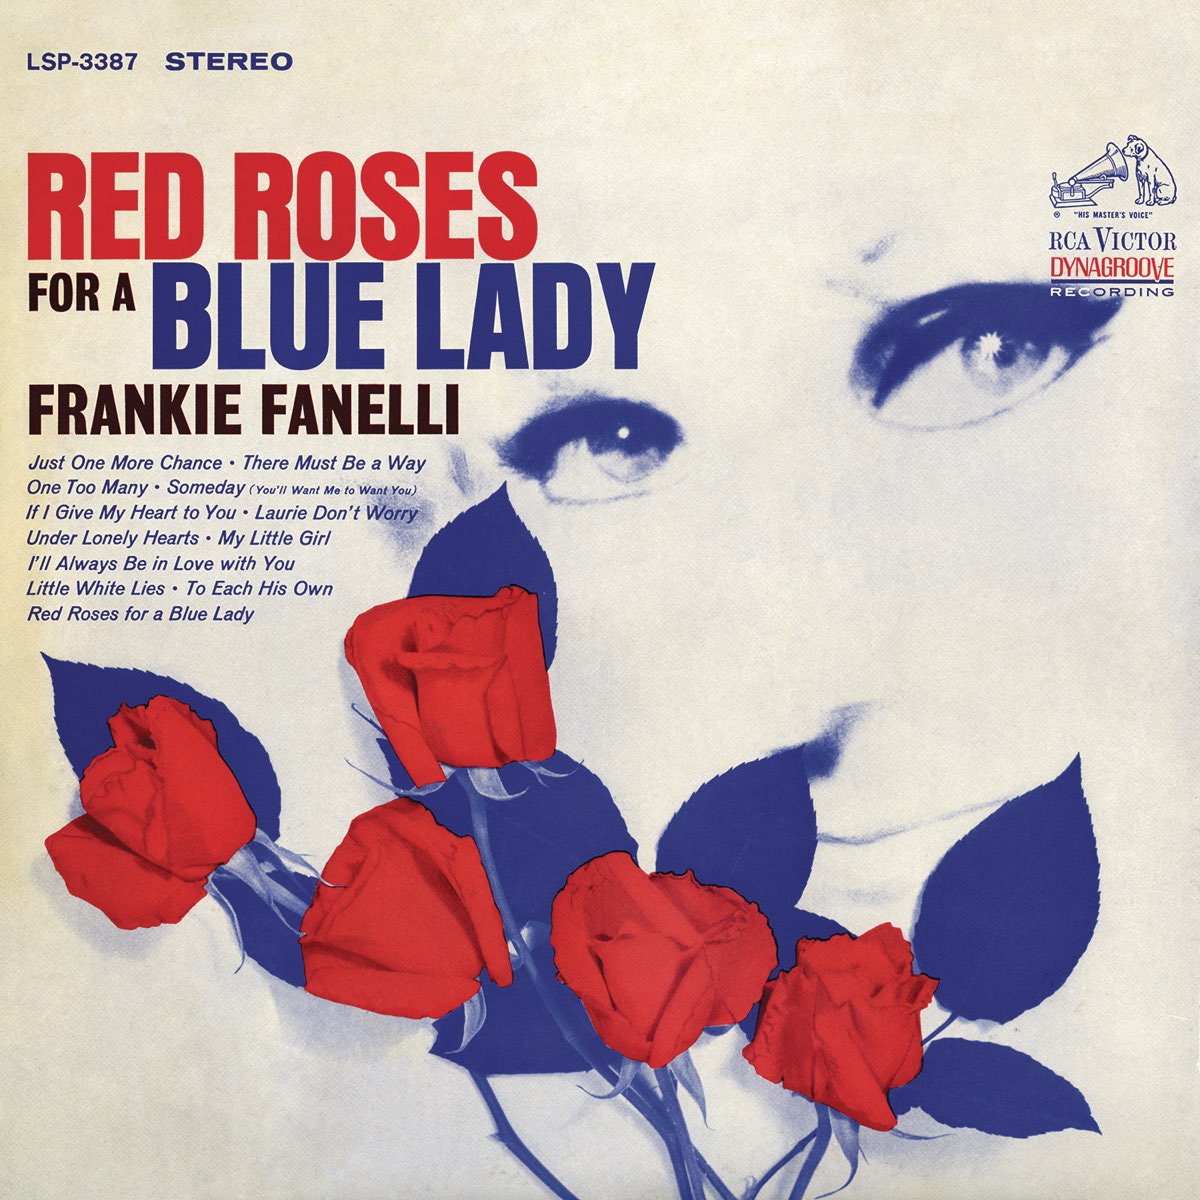 Red Roses for a Blue Lady by Frankie Fanelli on Apple Music